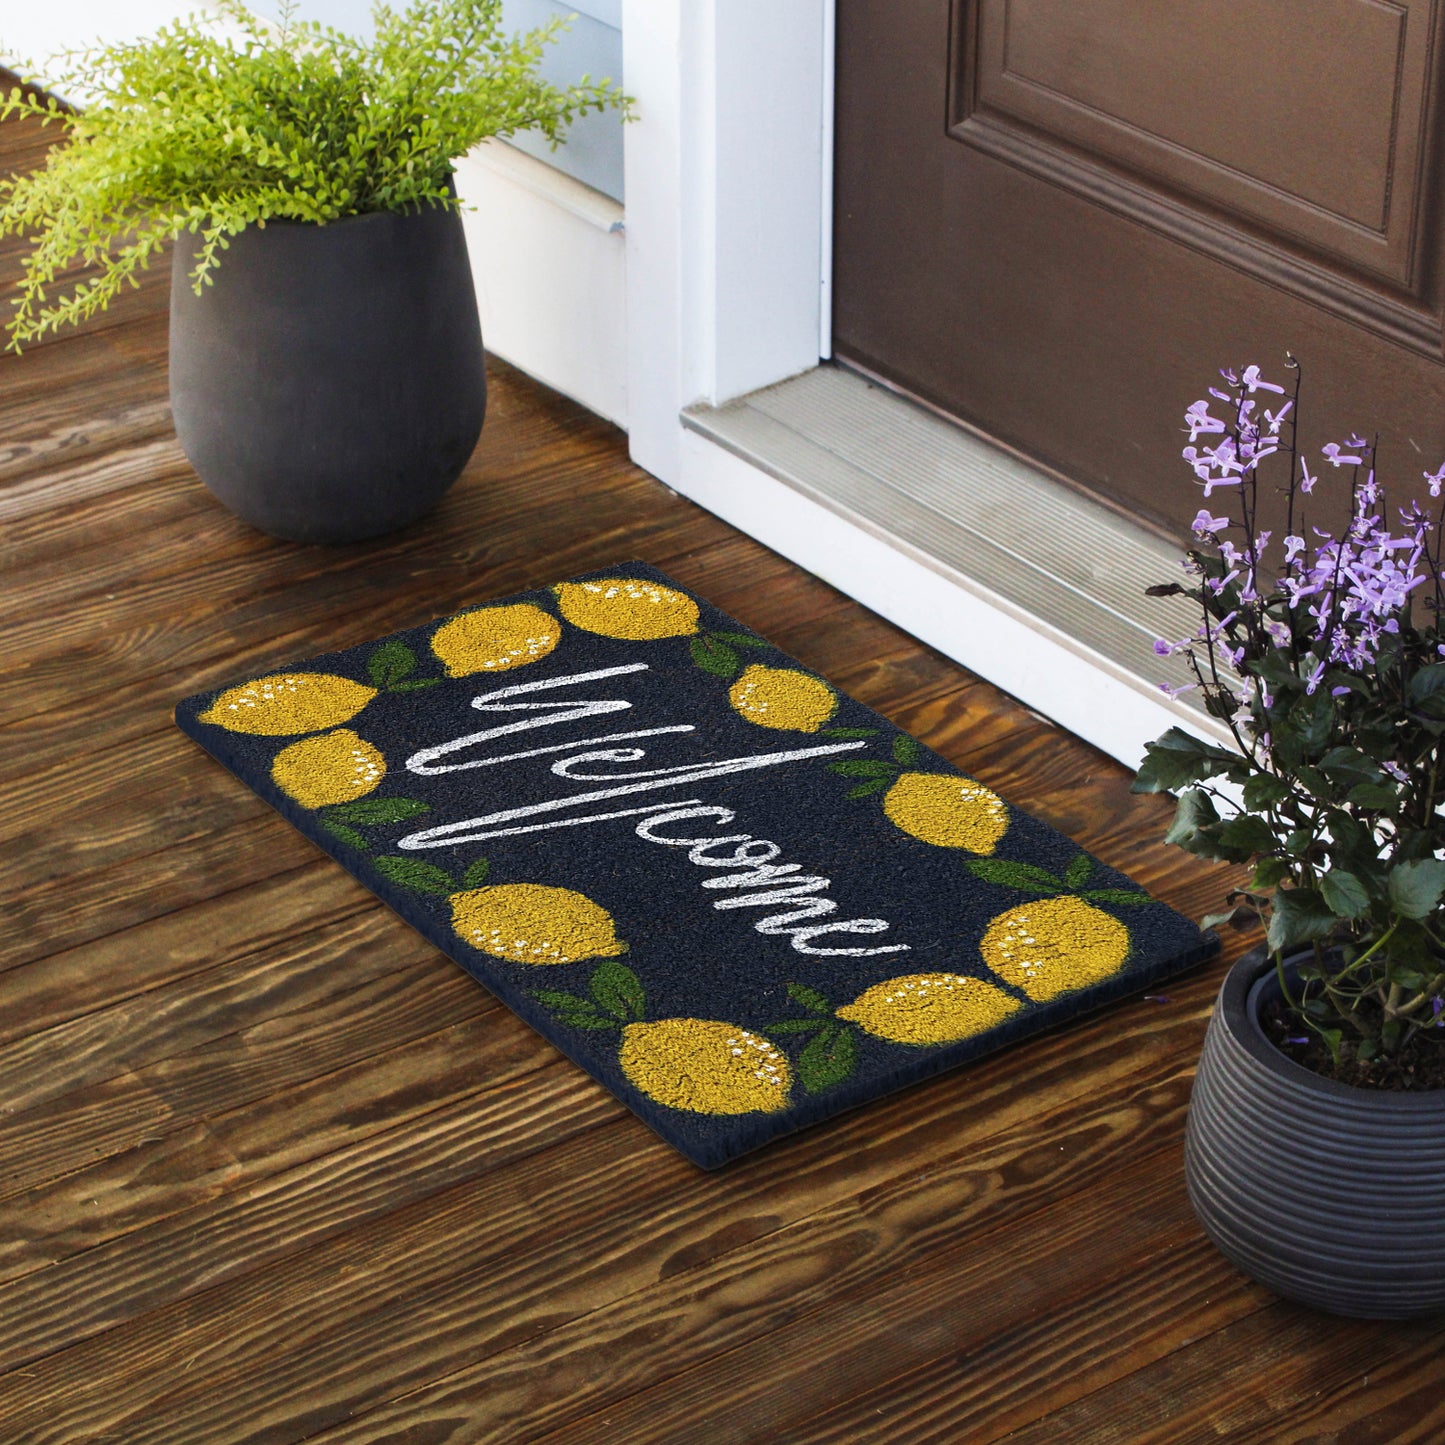 Avera Products "Welcome" Lemons Spring Summer Blue Doormat